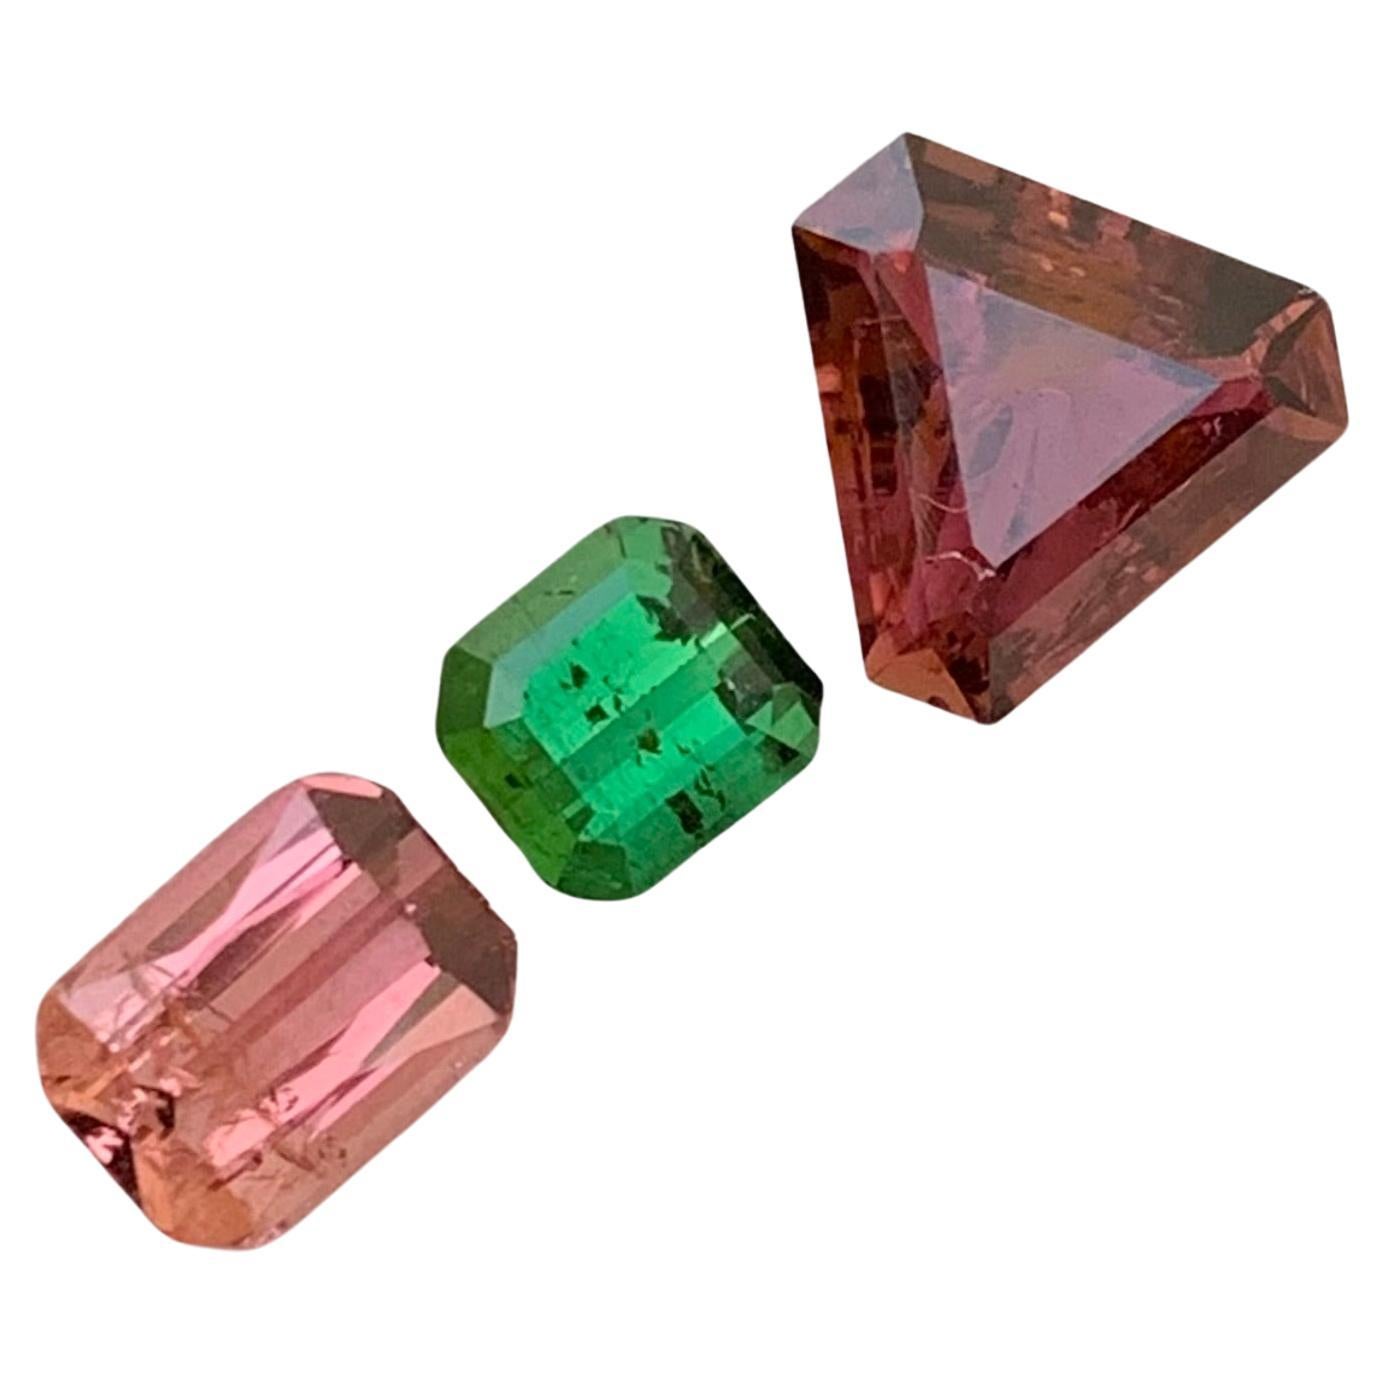 4.25 Carats Natural Loose Tourmaline Pieces For Jewellery Making 